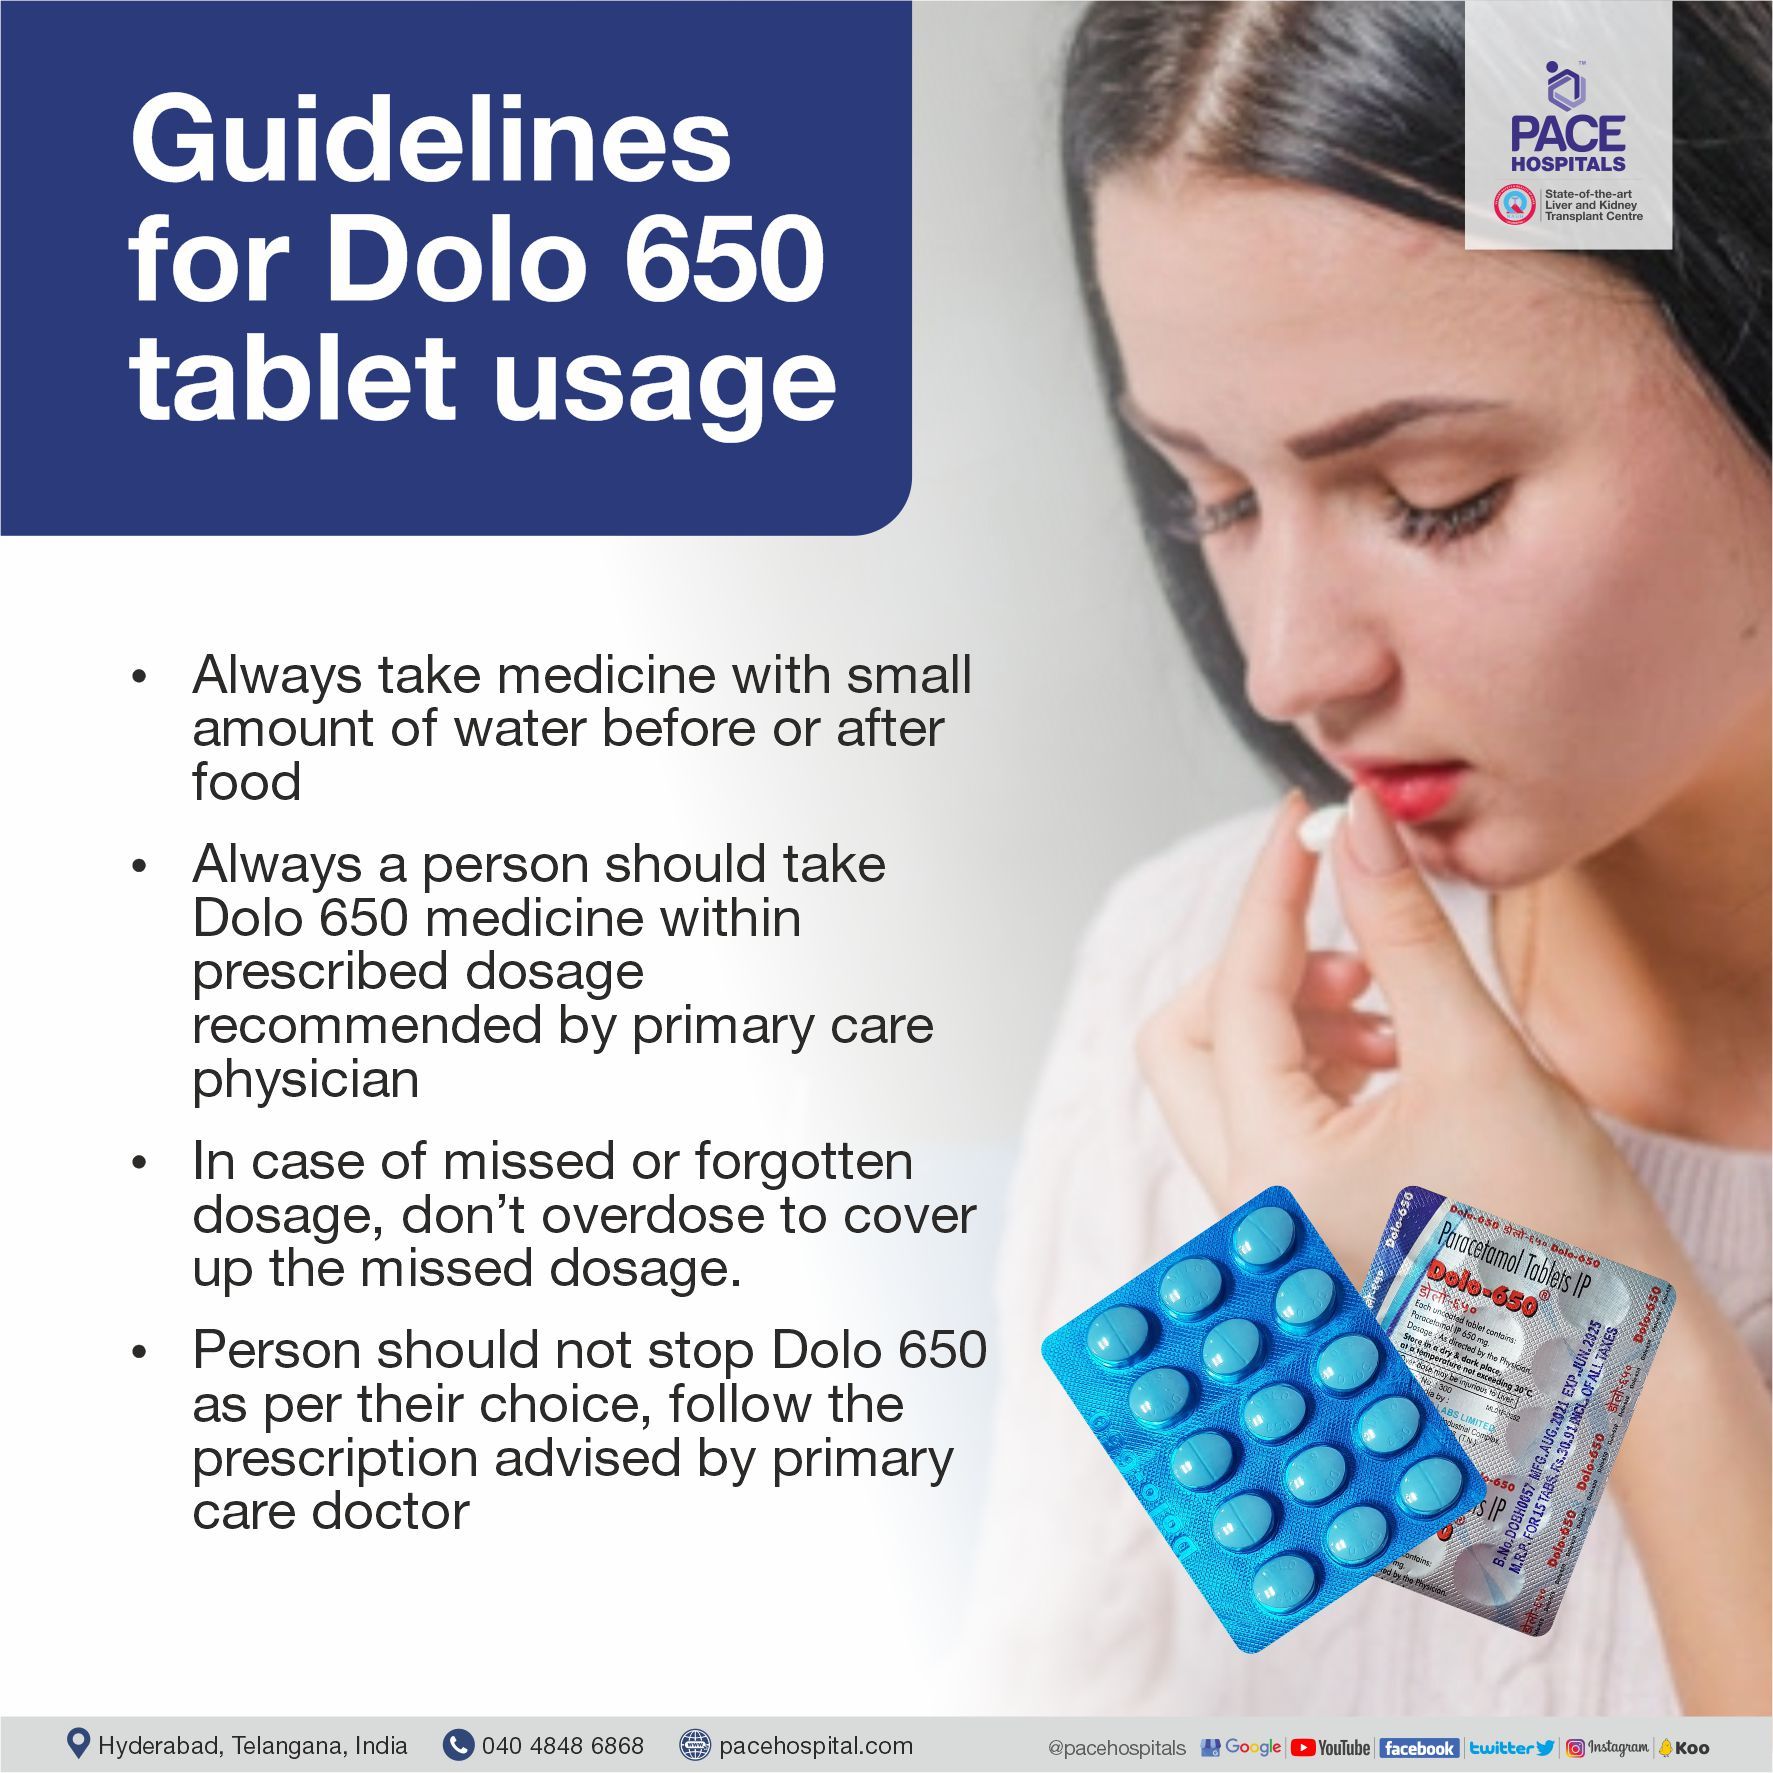 Guidelines for Dolo 650 tablet usage